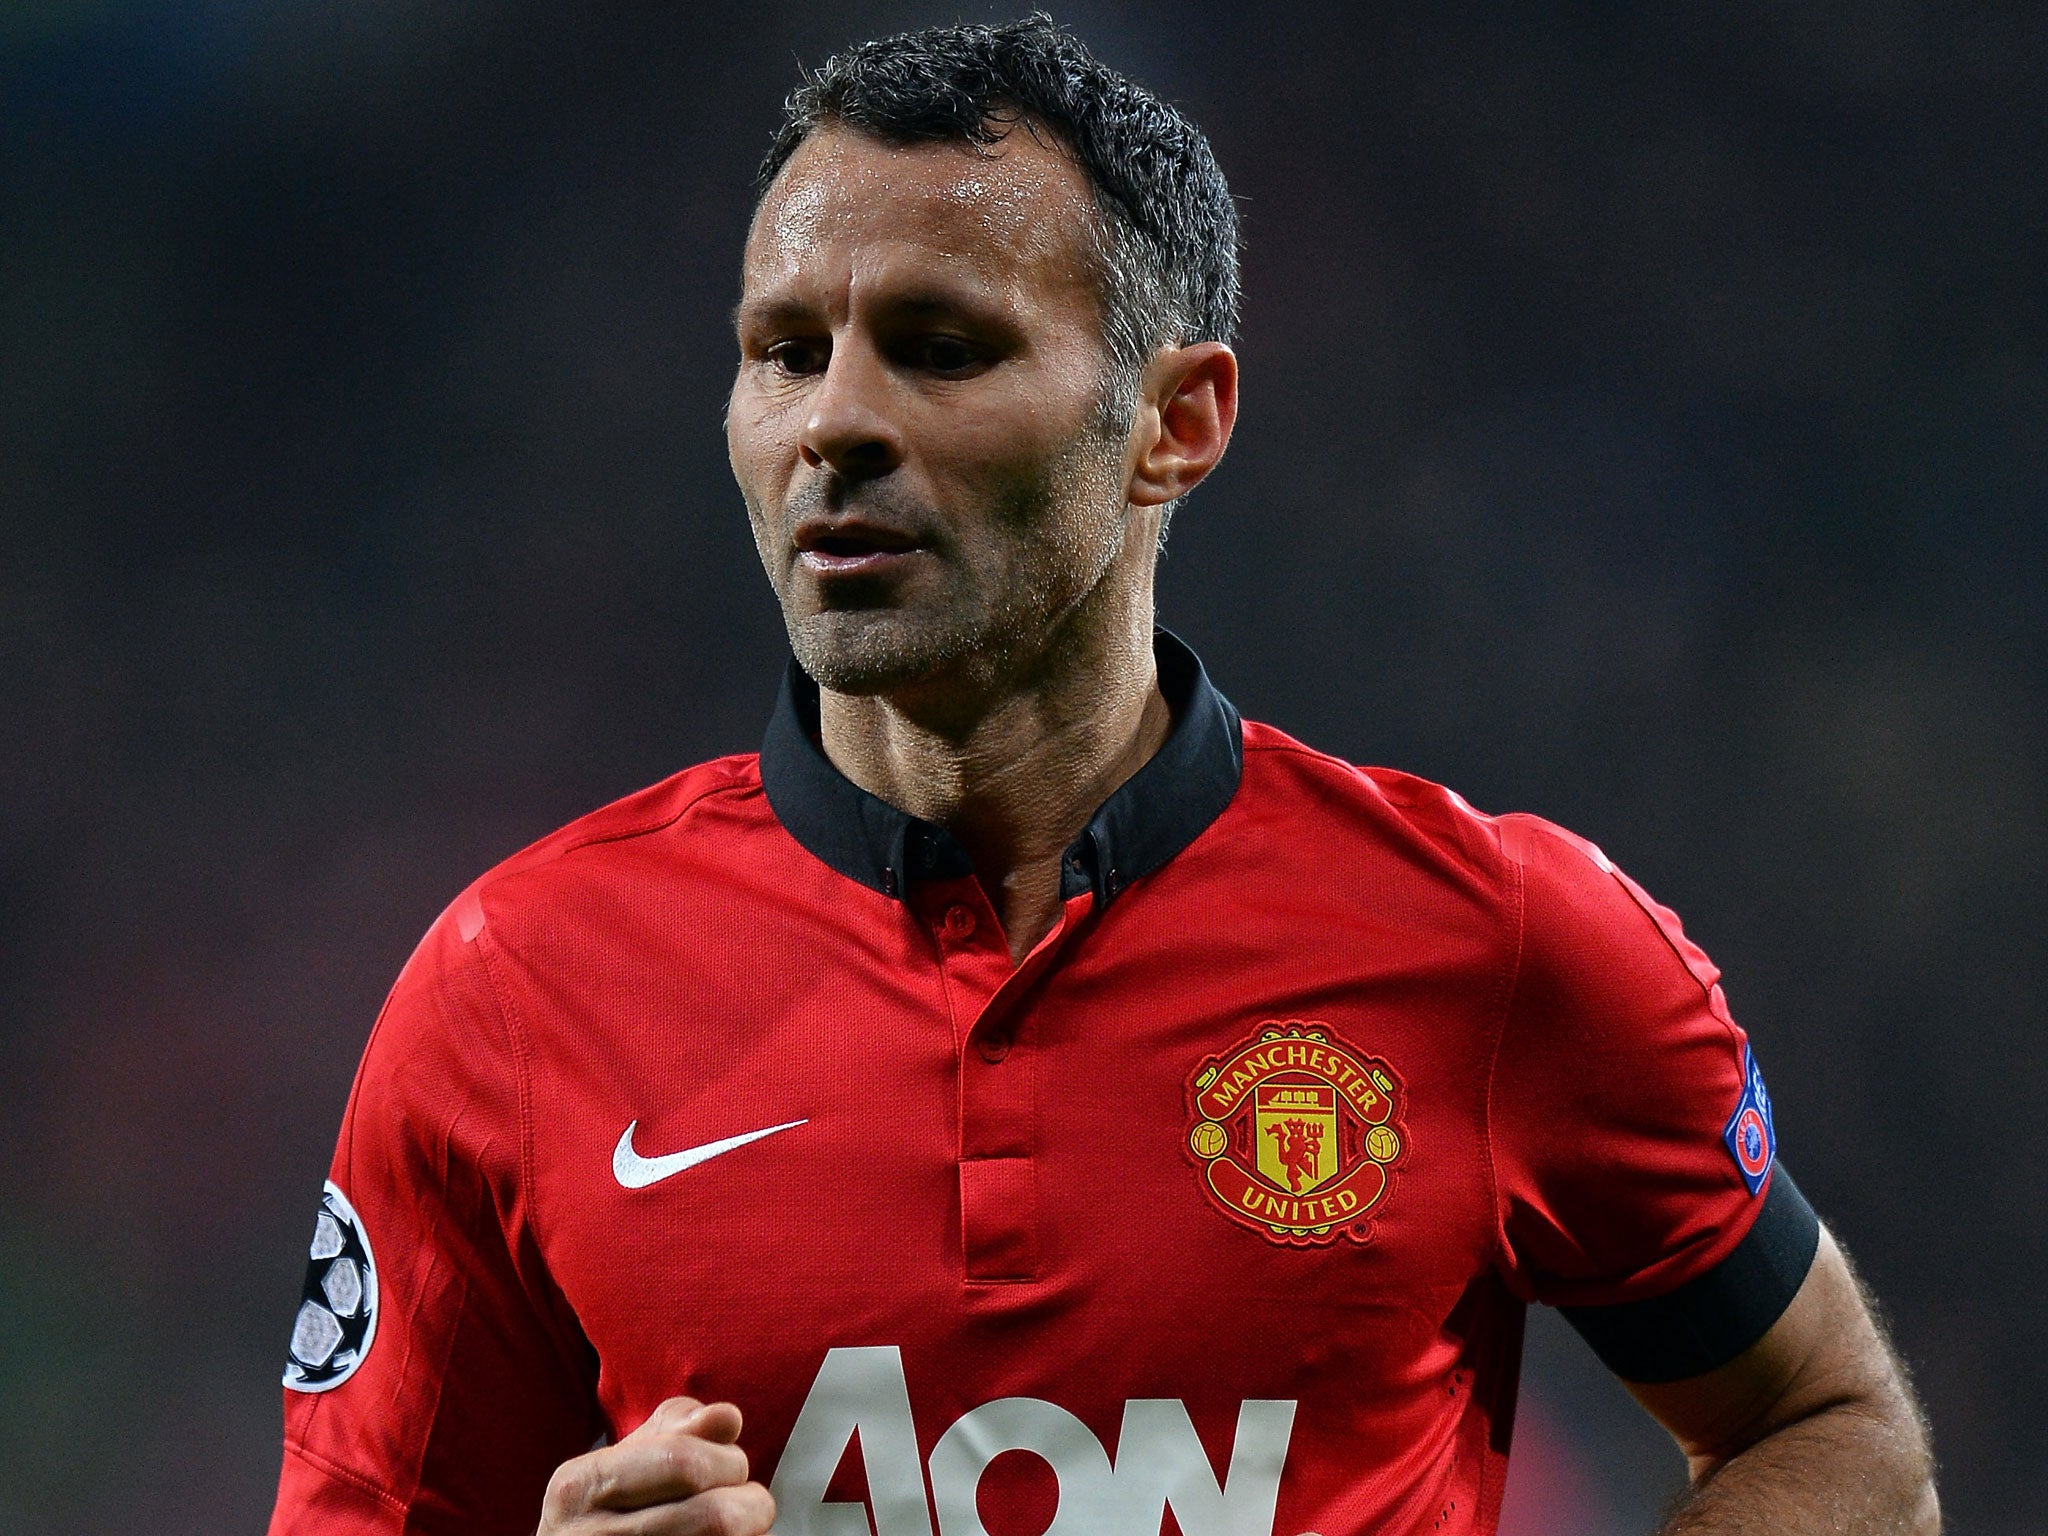 Giggs assisted the final goal - finished by Nani - in the 5-0 Champions League victory on Wednesday night, just two days before he turned 40